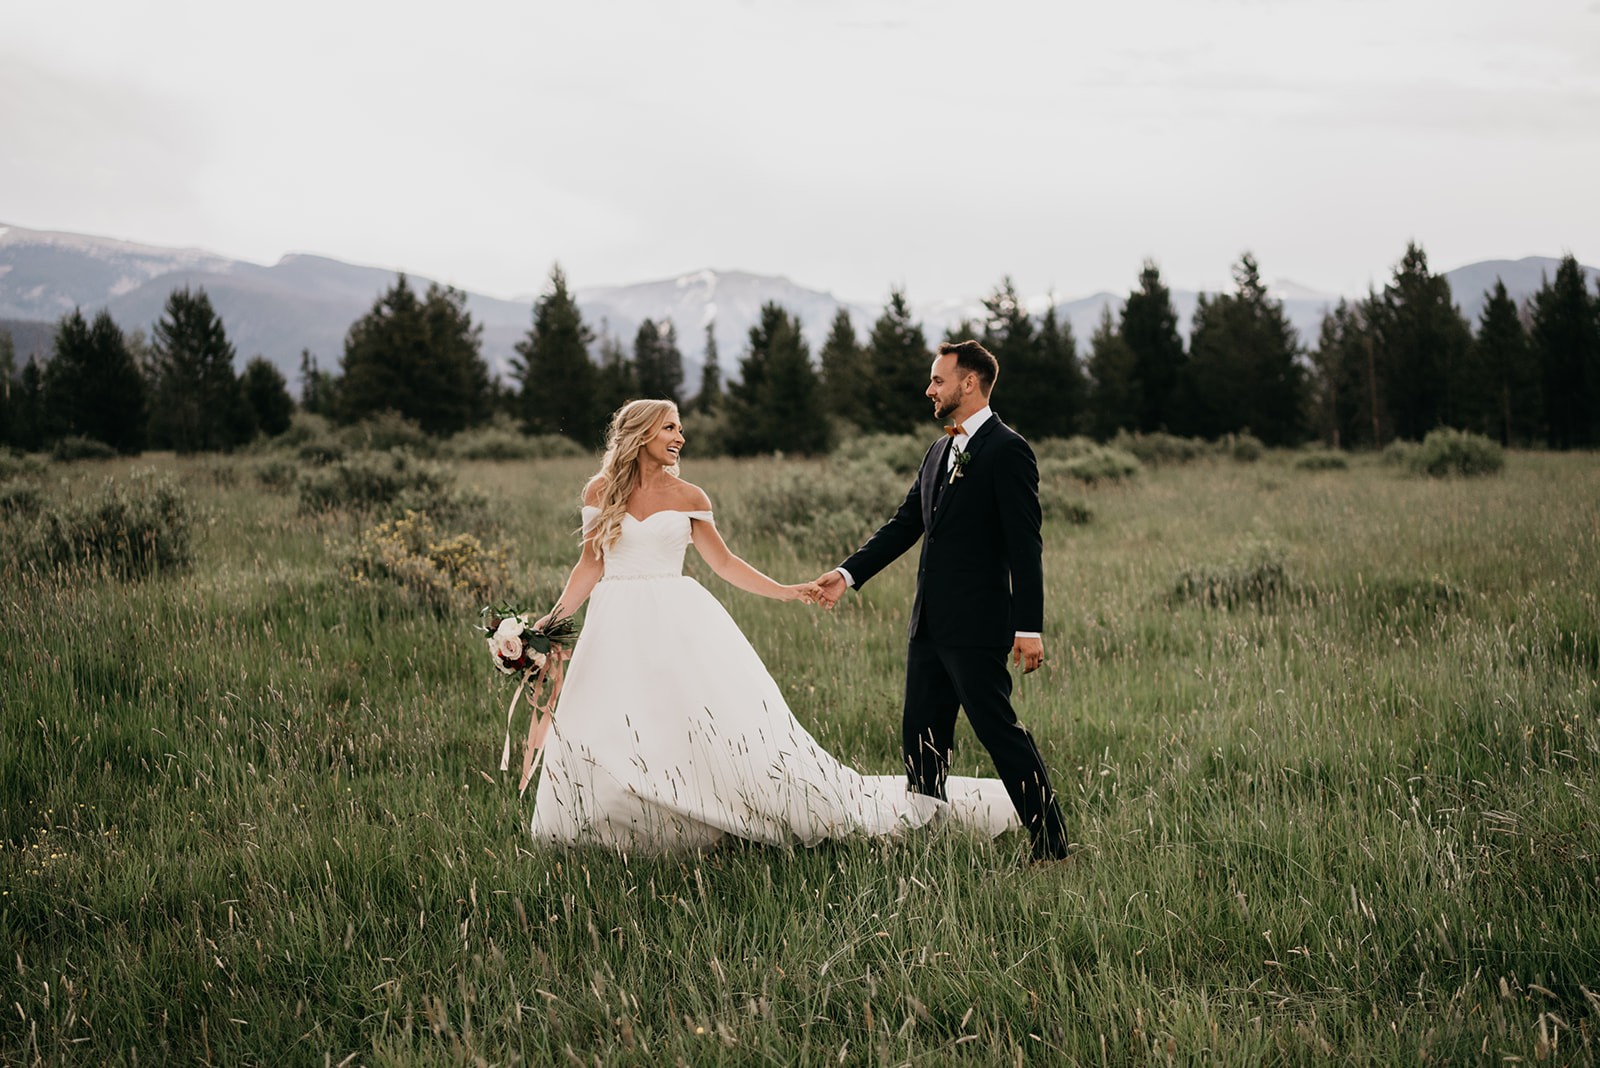 A couple smiling after their mountain wedding